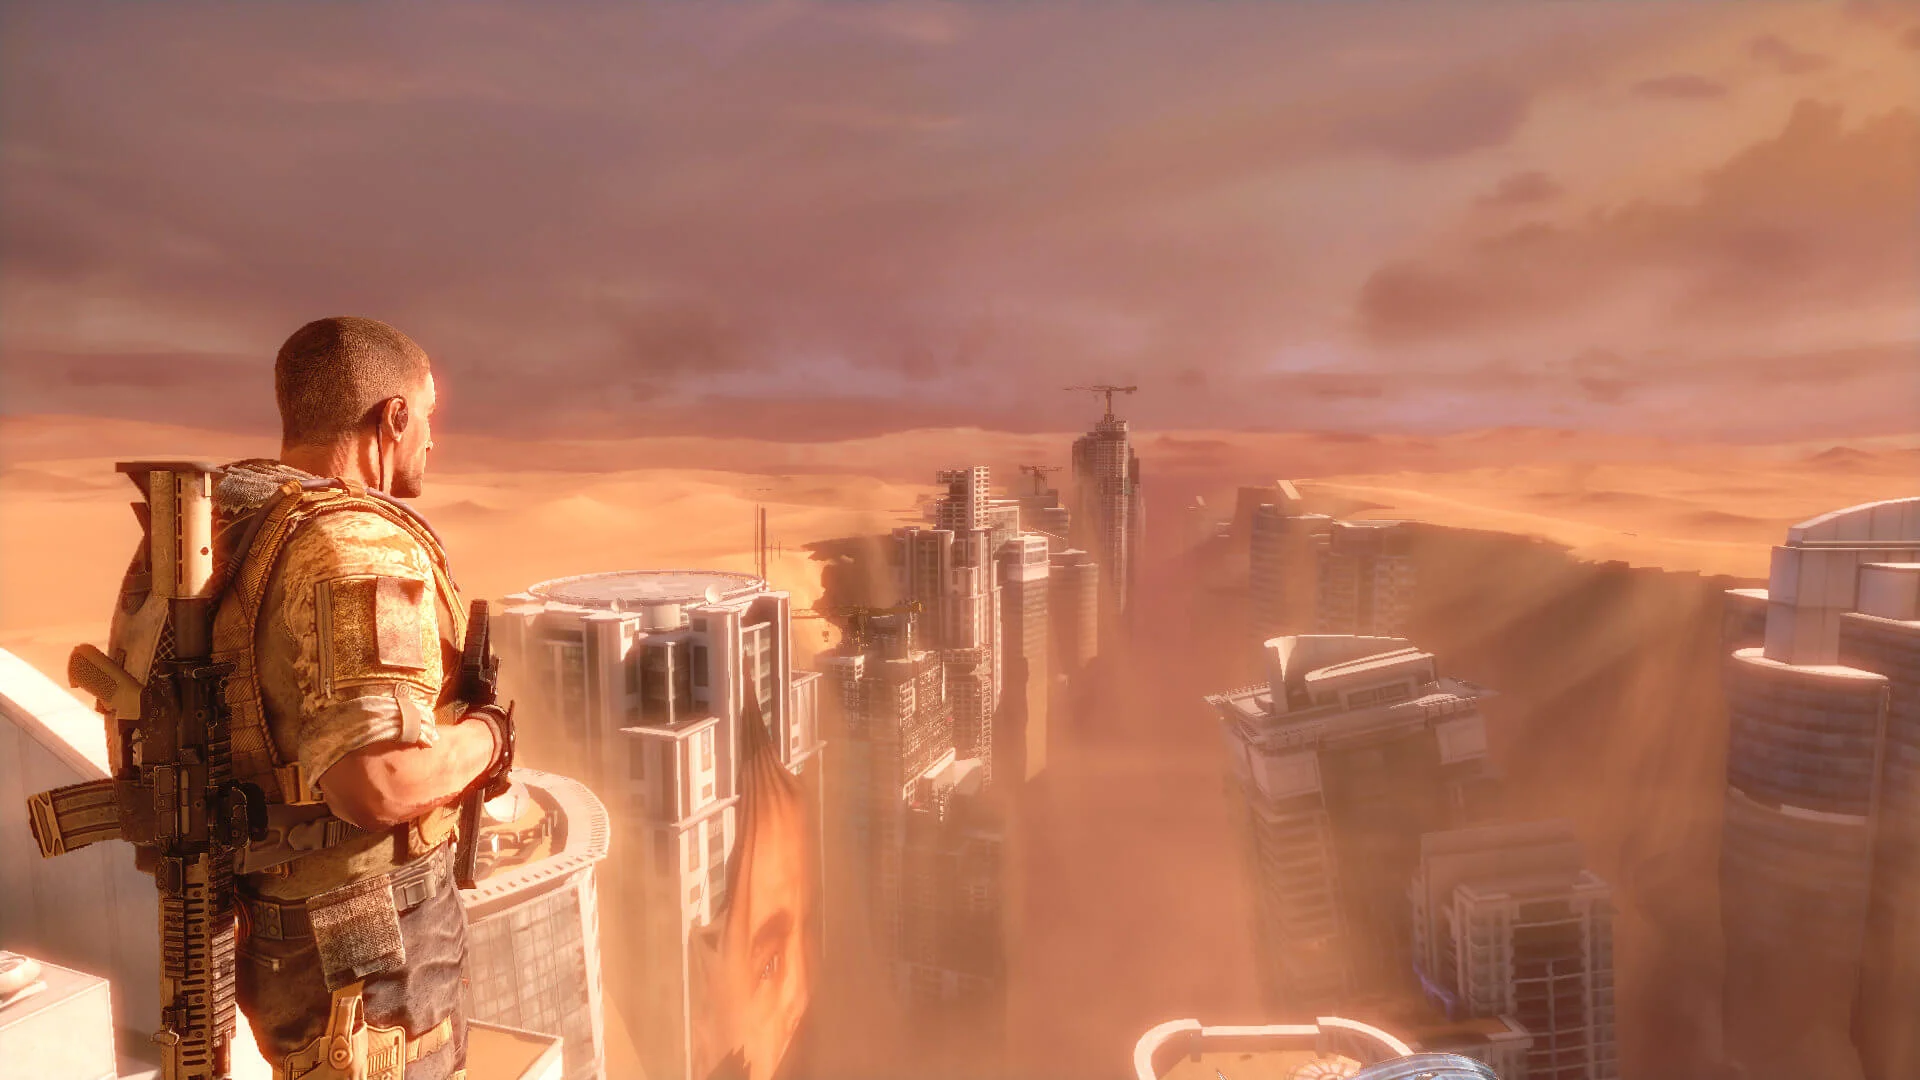 Popular shooter Spec Ops: The Line was unexpectedly removed from Steam